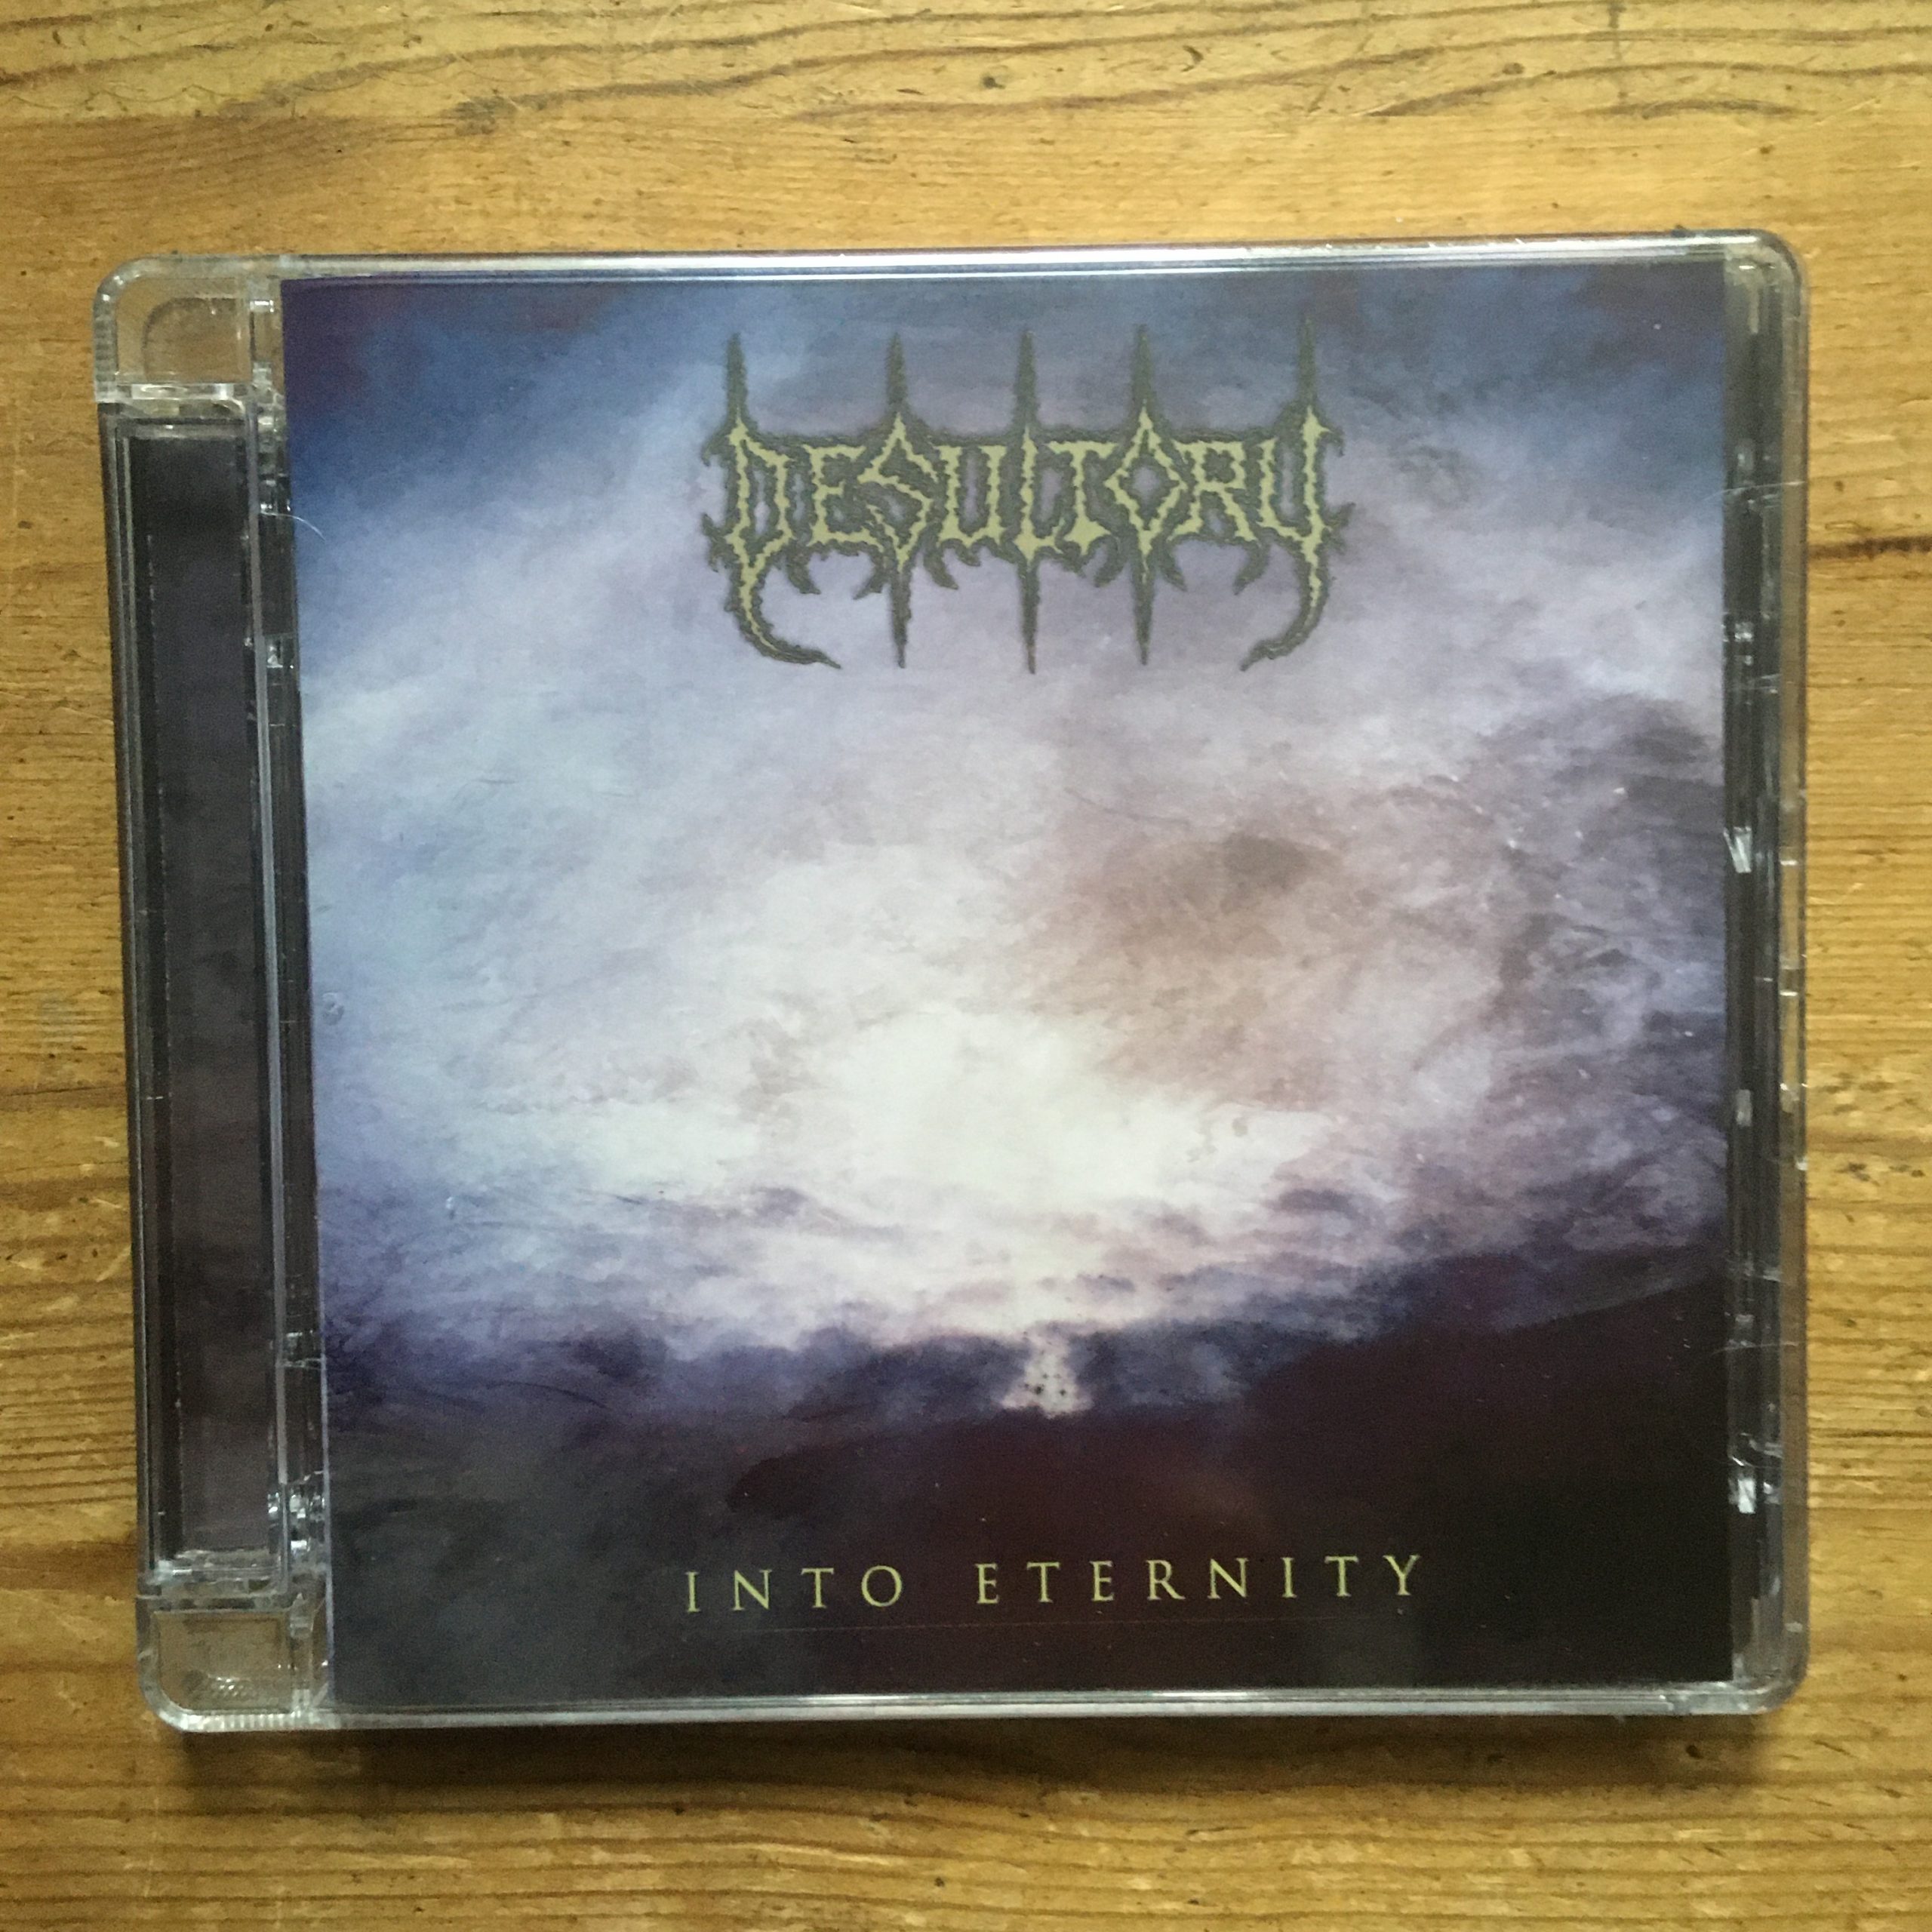 Photo of the Desultory - 